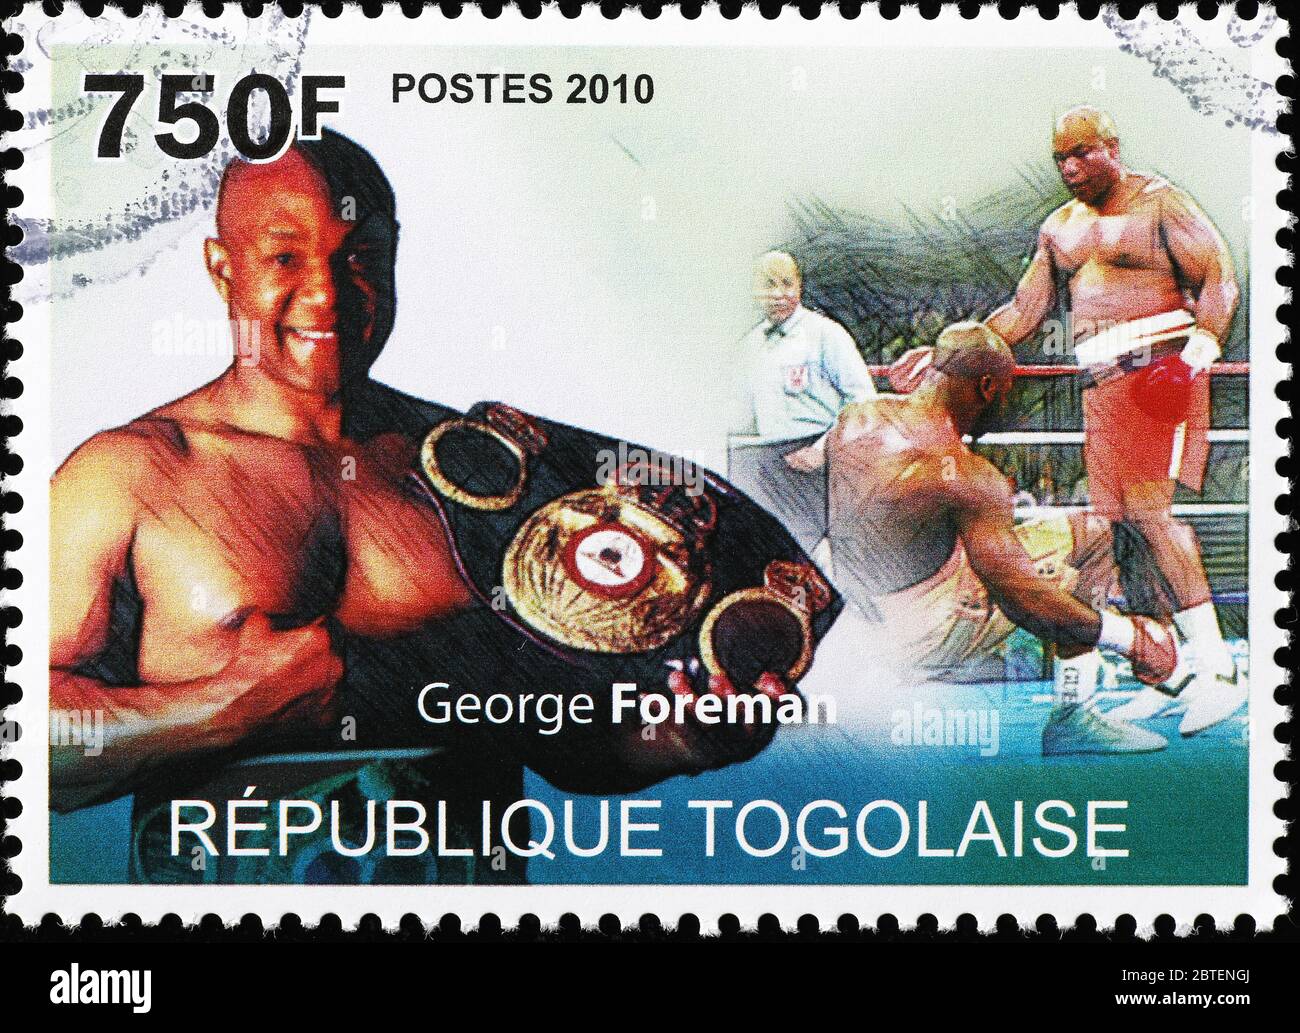 Boxer George Foreman on postage stamp of Togo Stock Photo